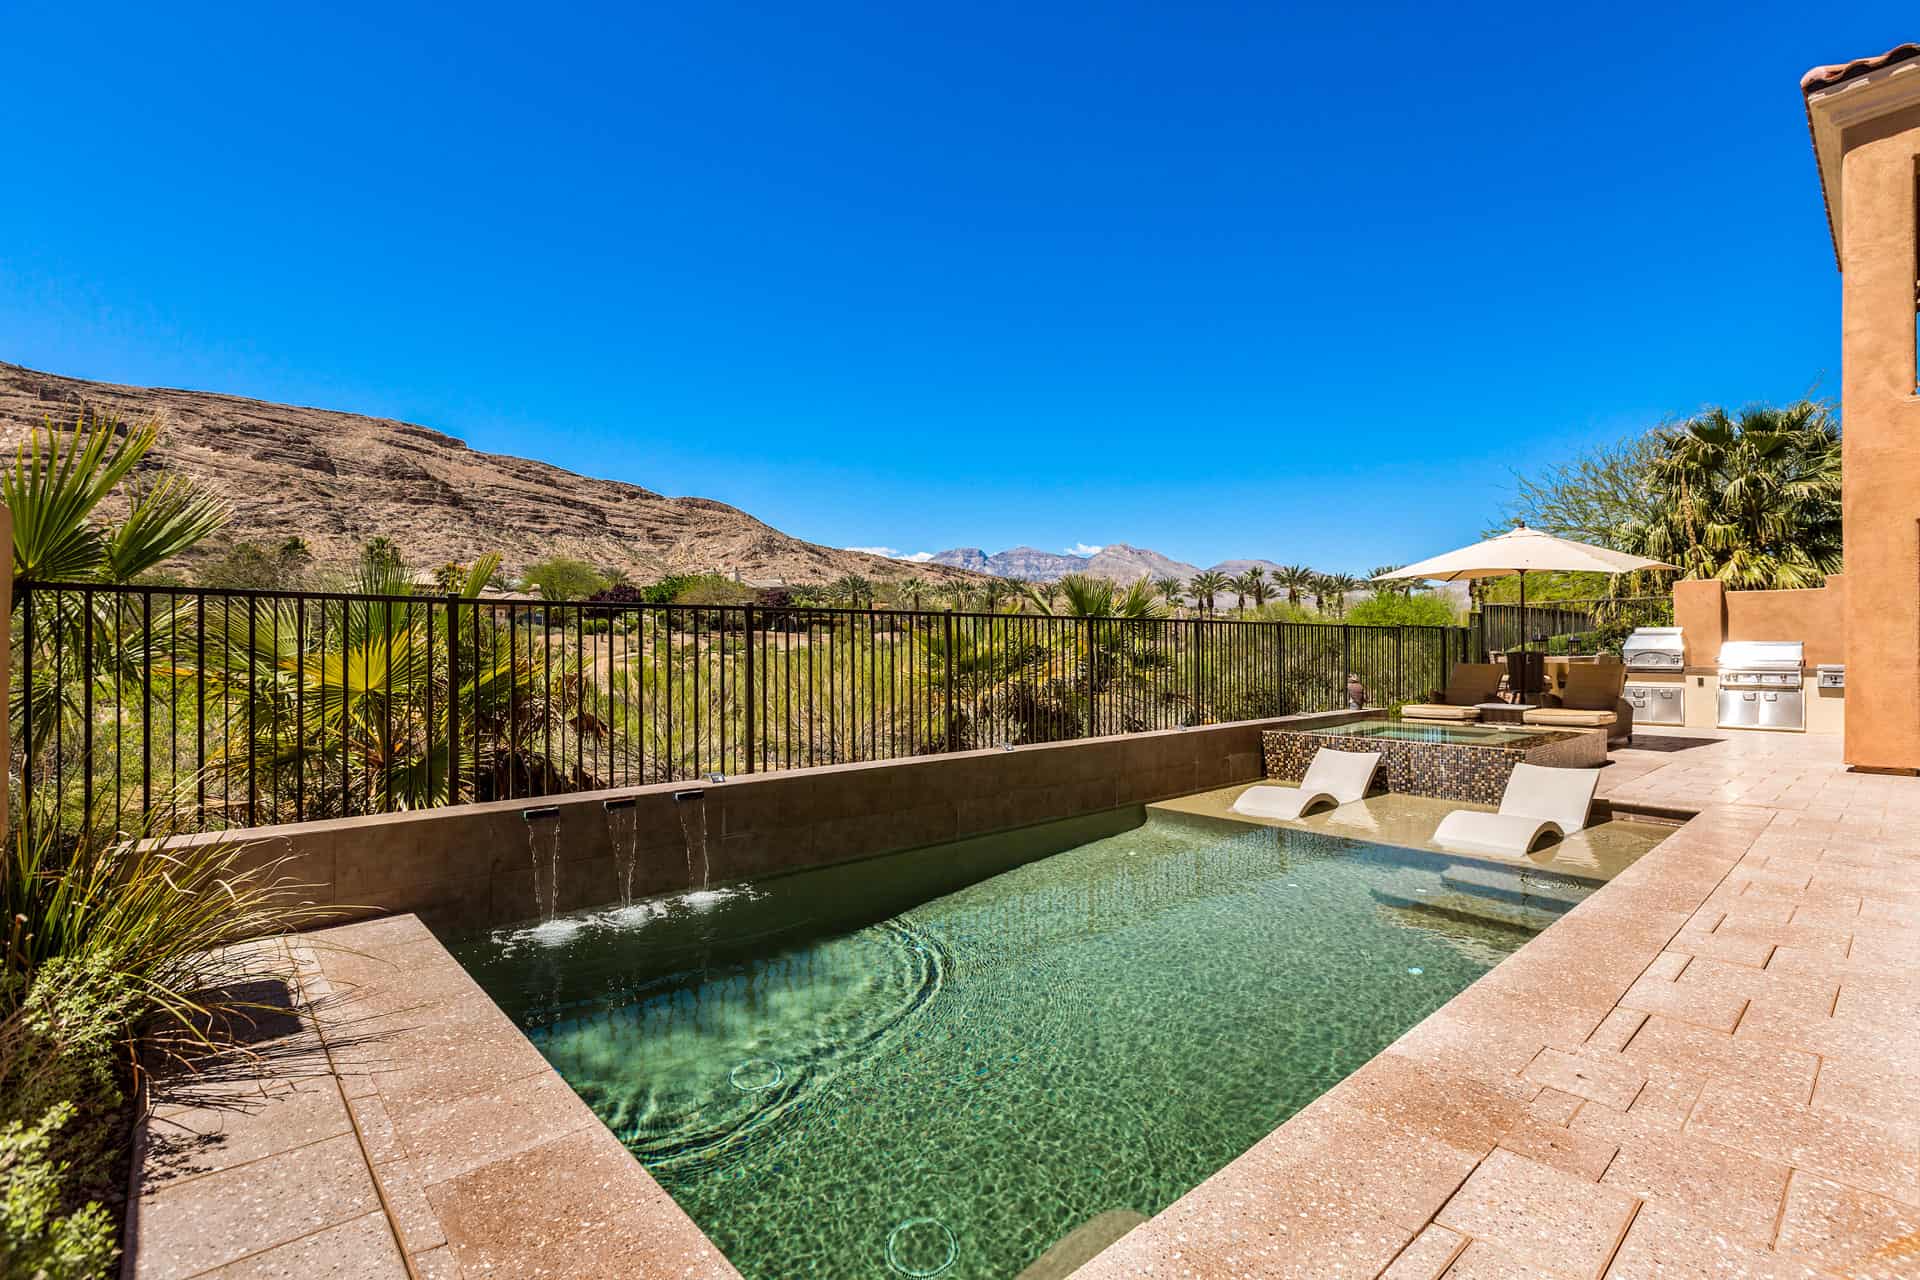 las-vegas-luxry-real-estate-realtor-rob-jensen-company-2615-grassy-spring-place-red-rock-country-club55